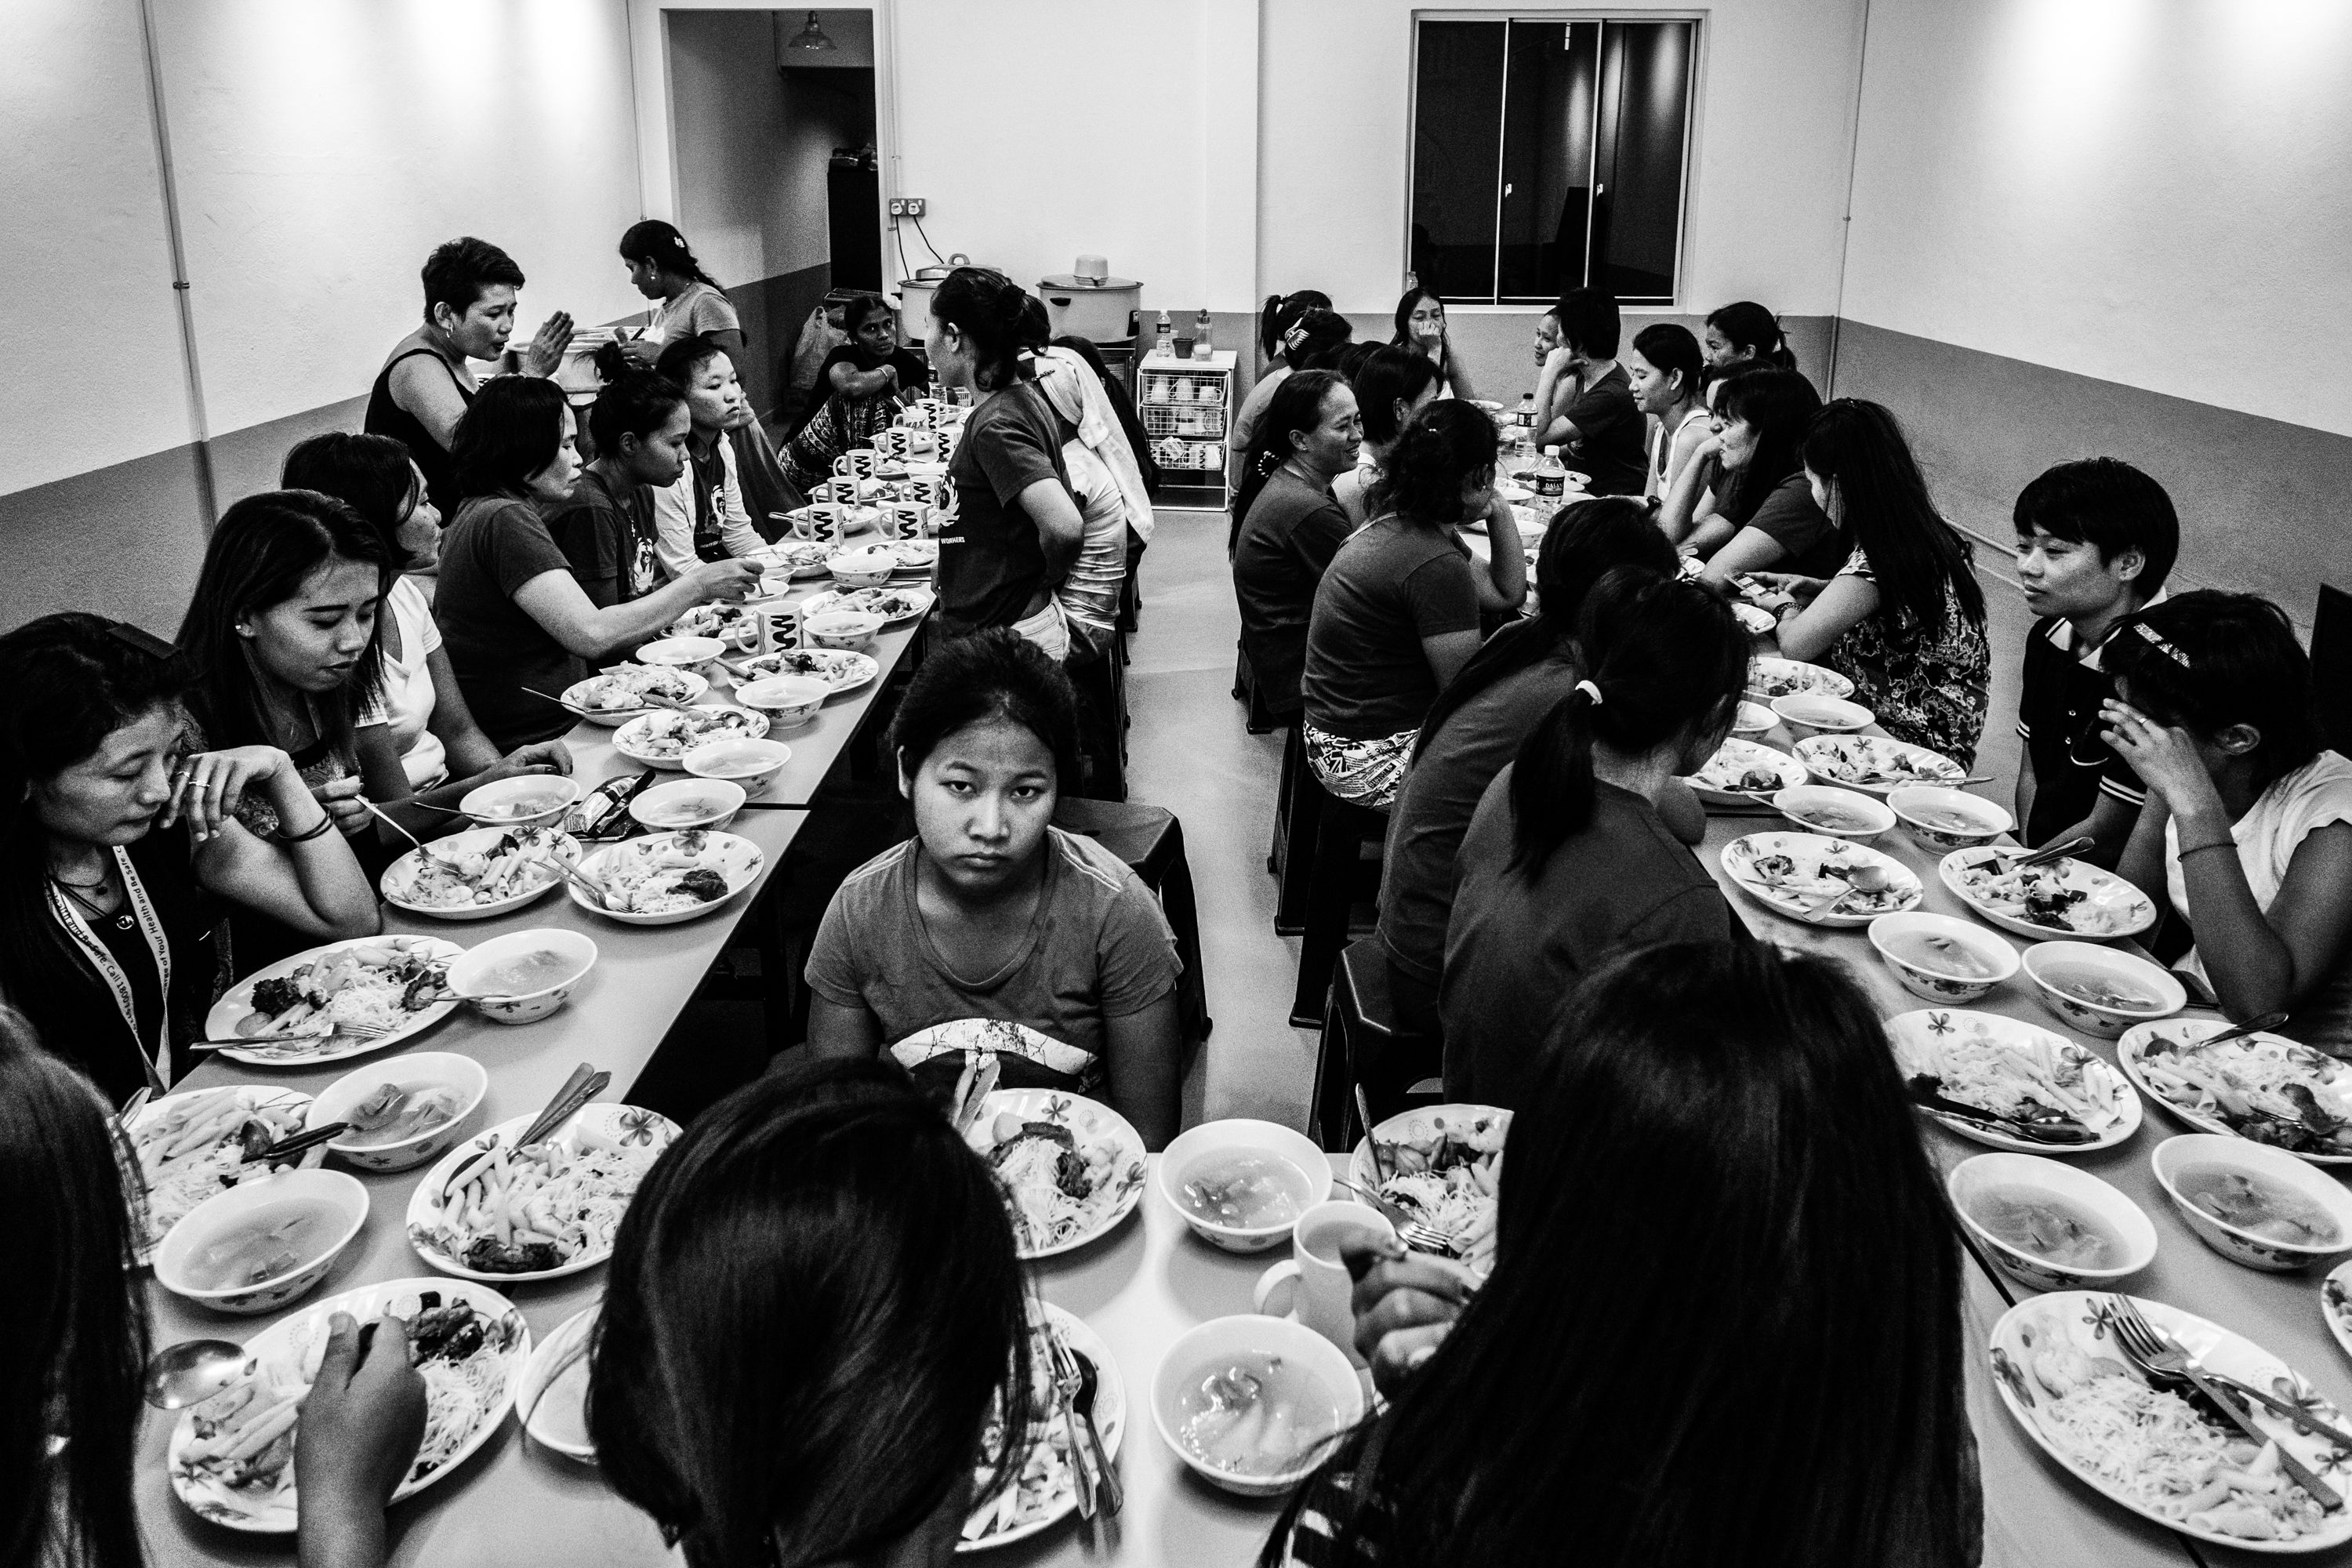 Runaway migrant workers shared a meal inside the kitchen of the shelter. Image by Xyza Bacani. Singapore, 2016. 